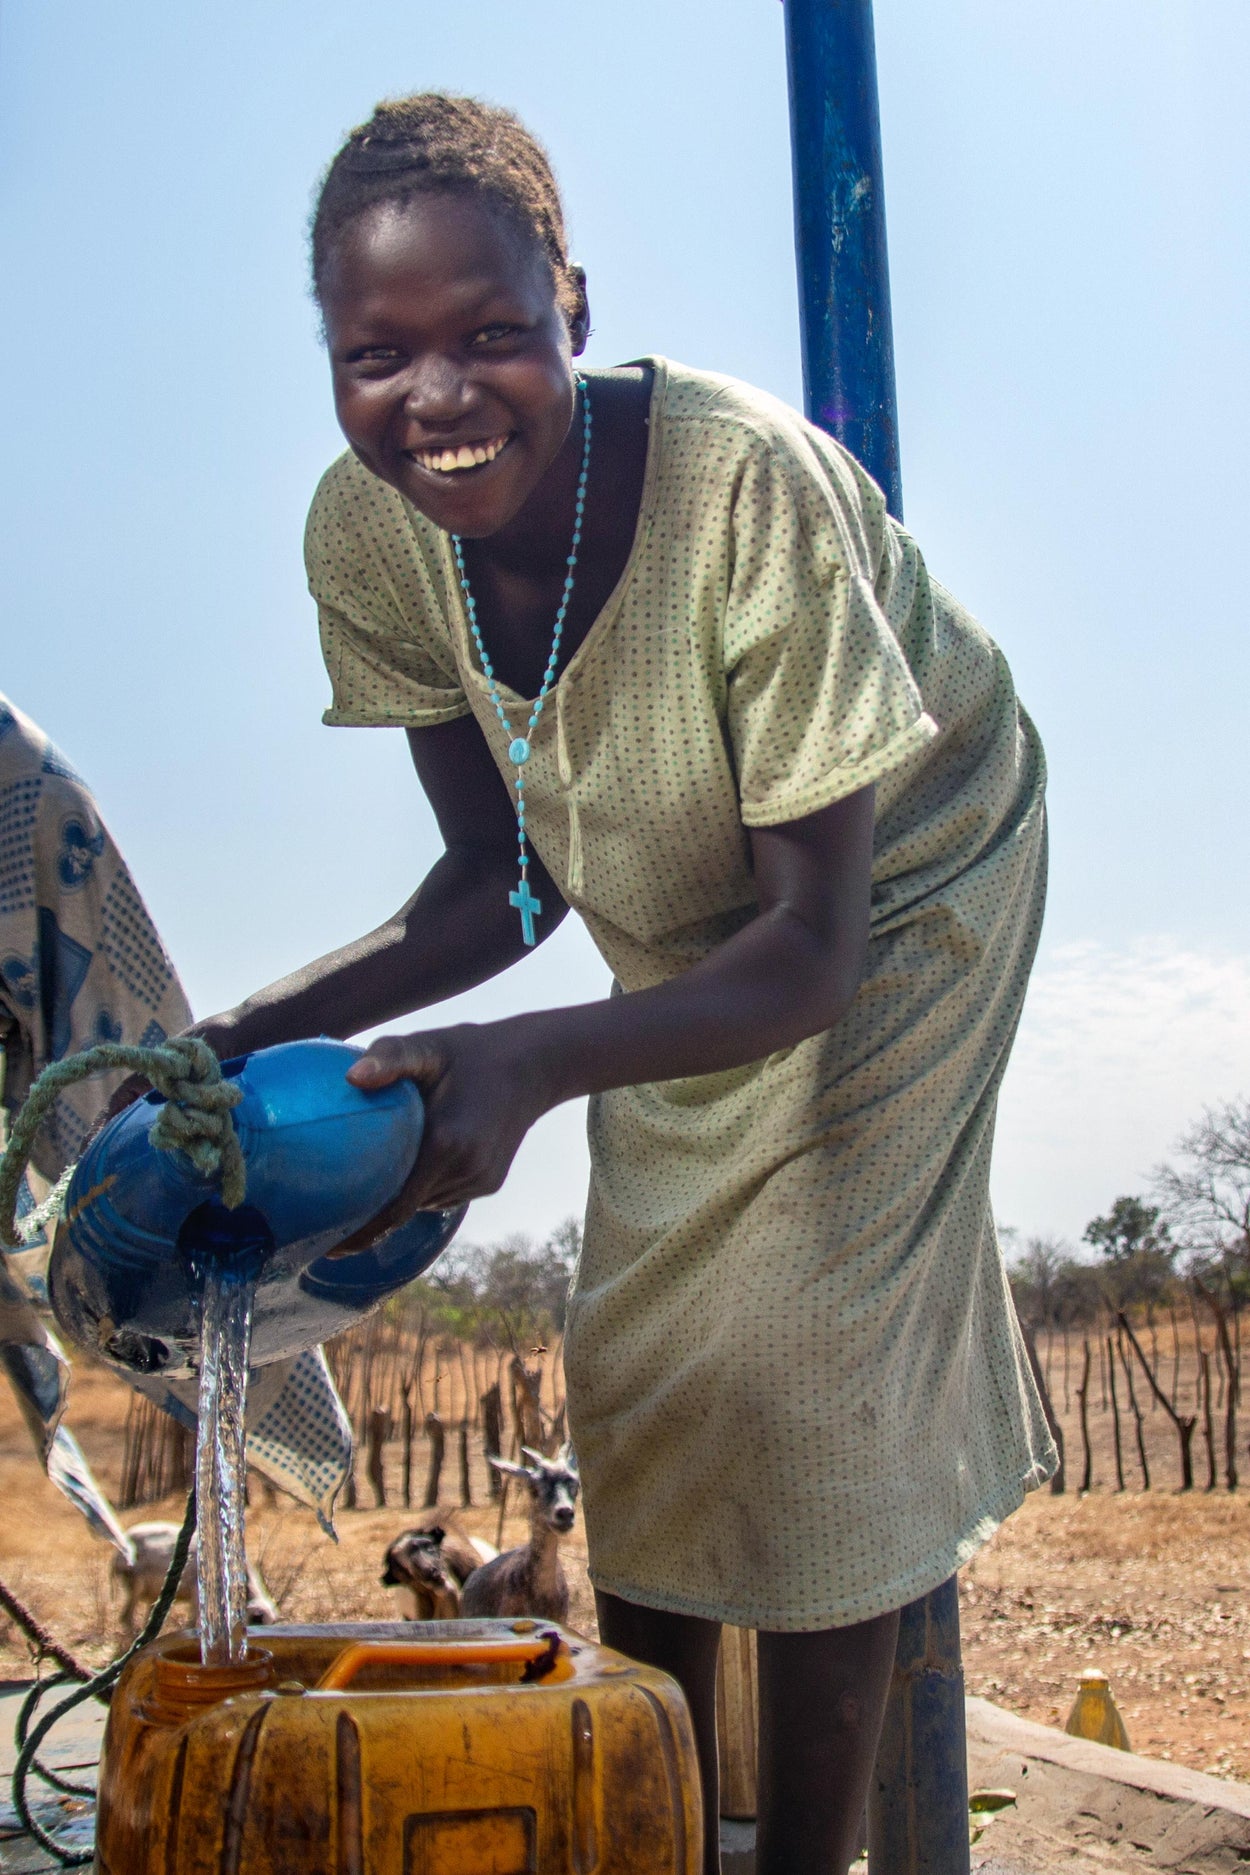 A woman smiles as she draws clean water from a well!